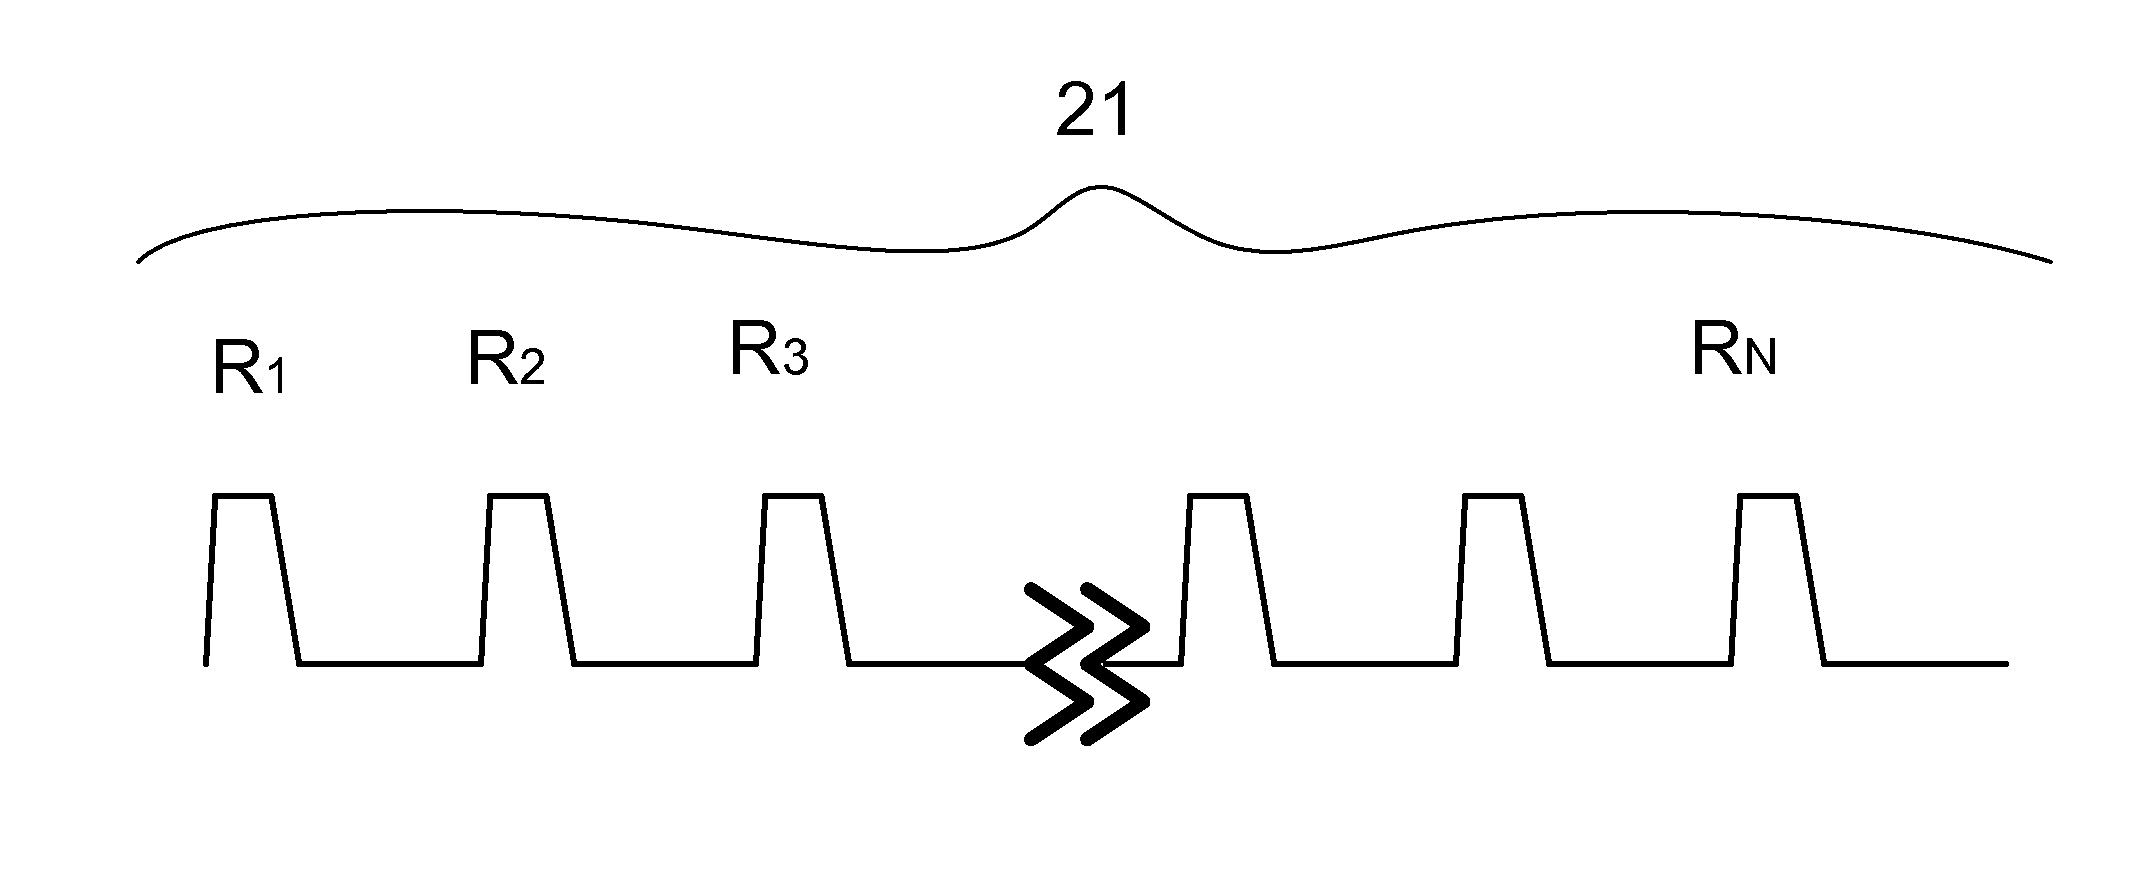 Method and apparatus for scribing a line in a thin film using a series of laser pulses